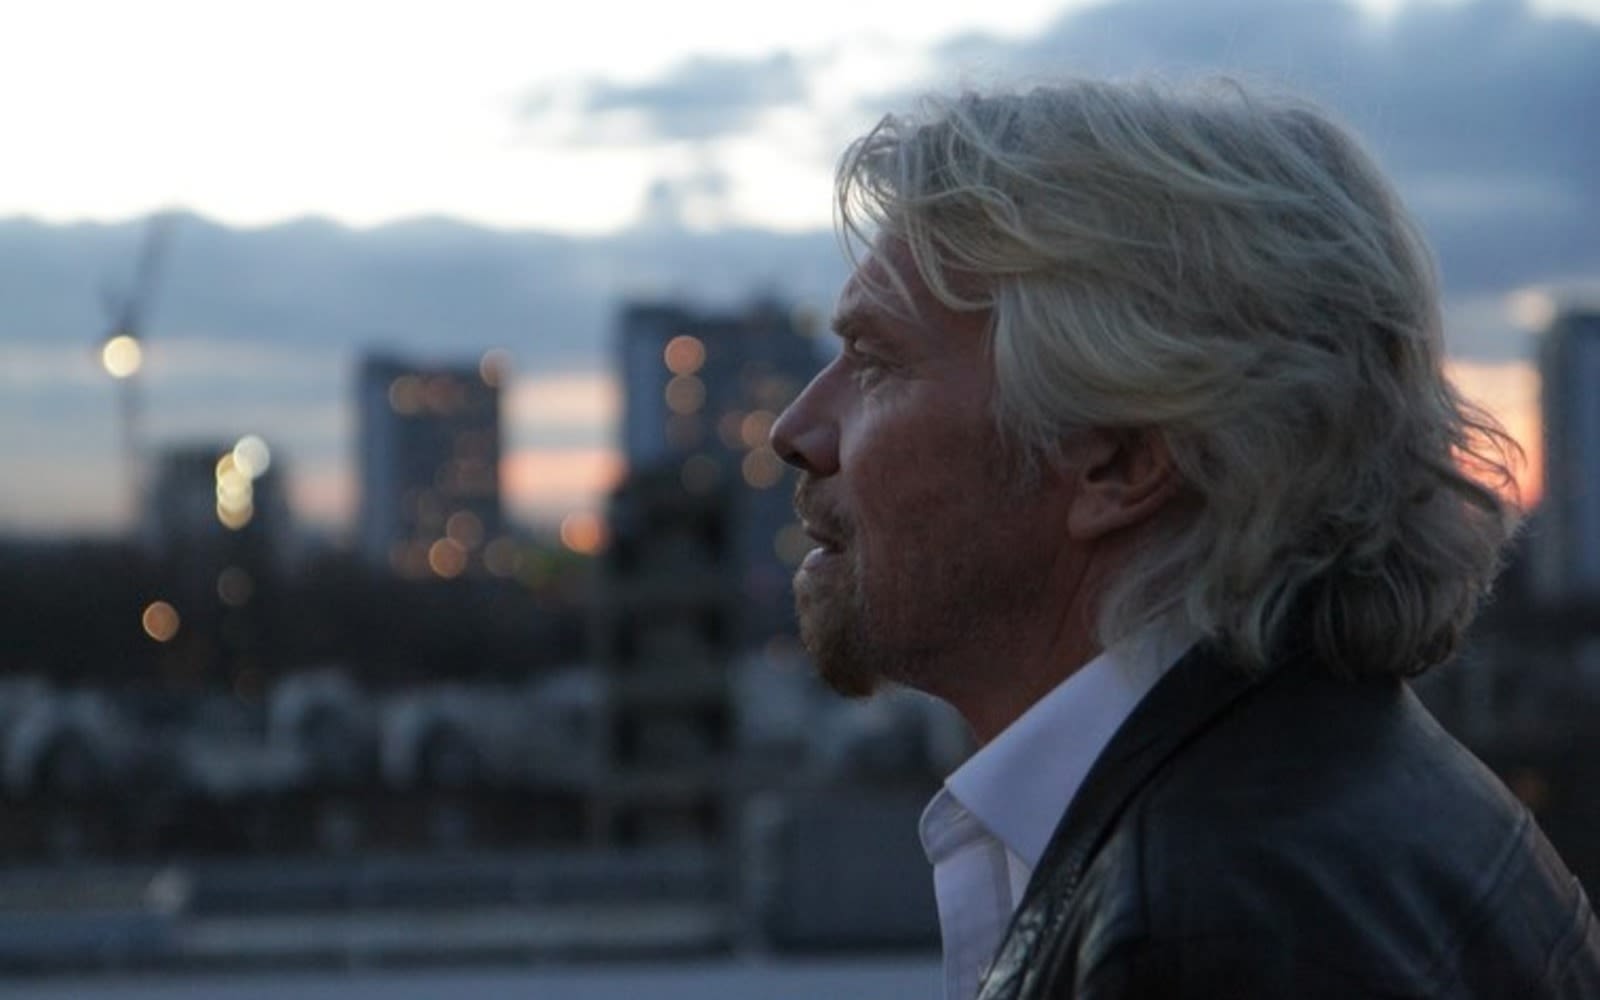 Richard Branson looking into the distance at dusk, with a city outline behind him